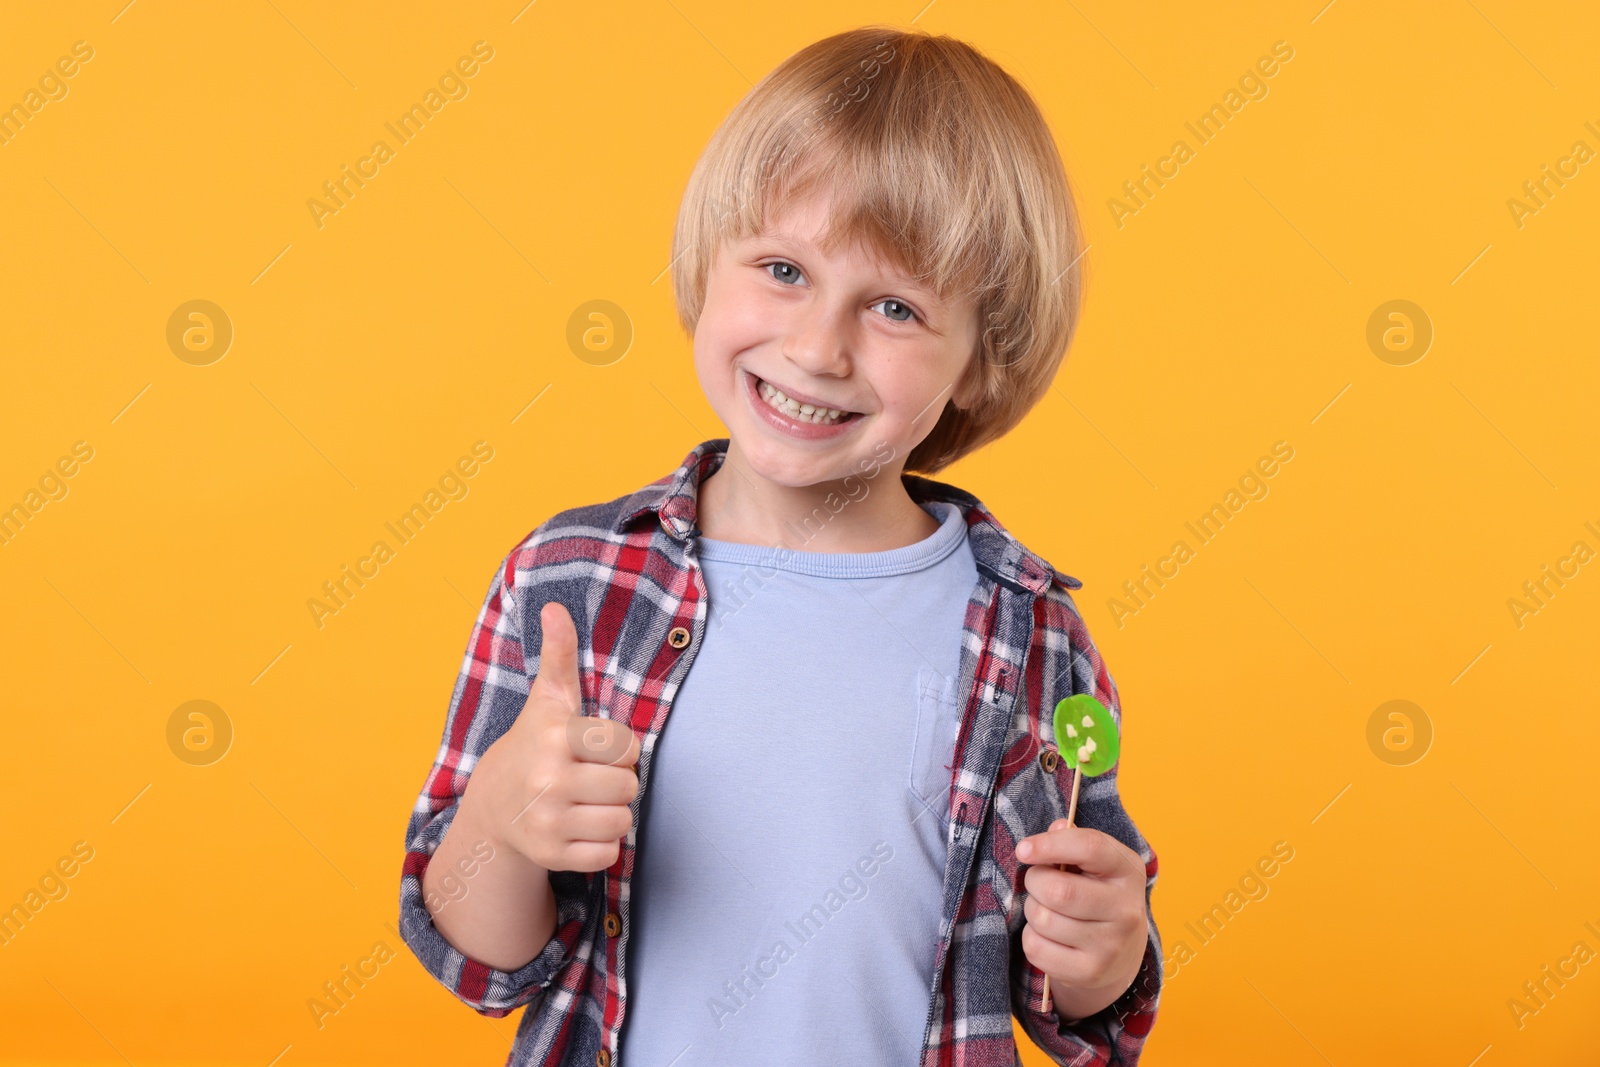 Photo of Happy little boy with lollipop showing thumbs up on orange background